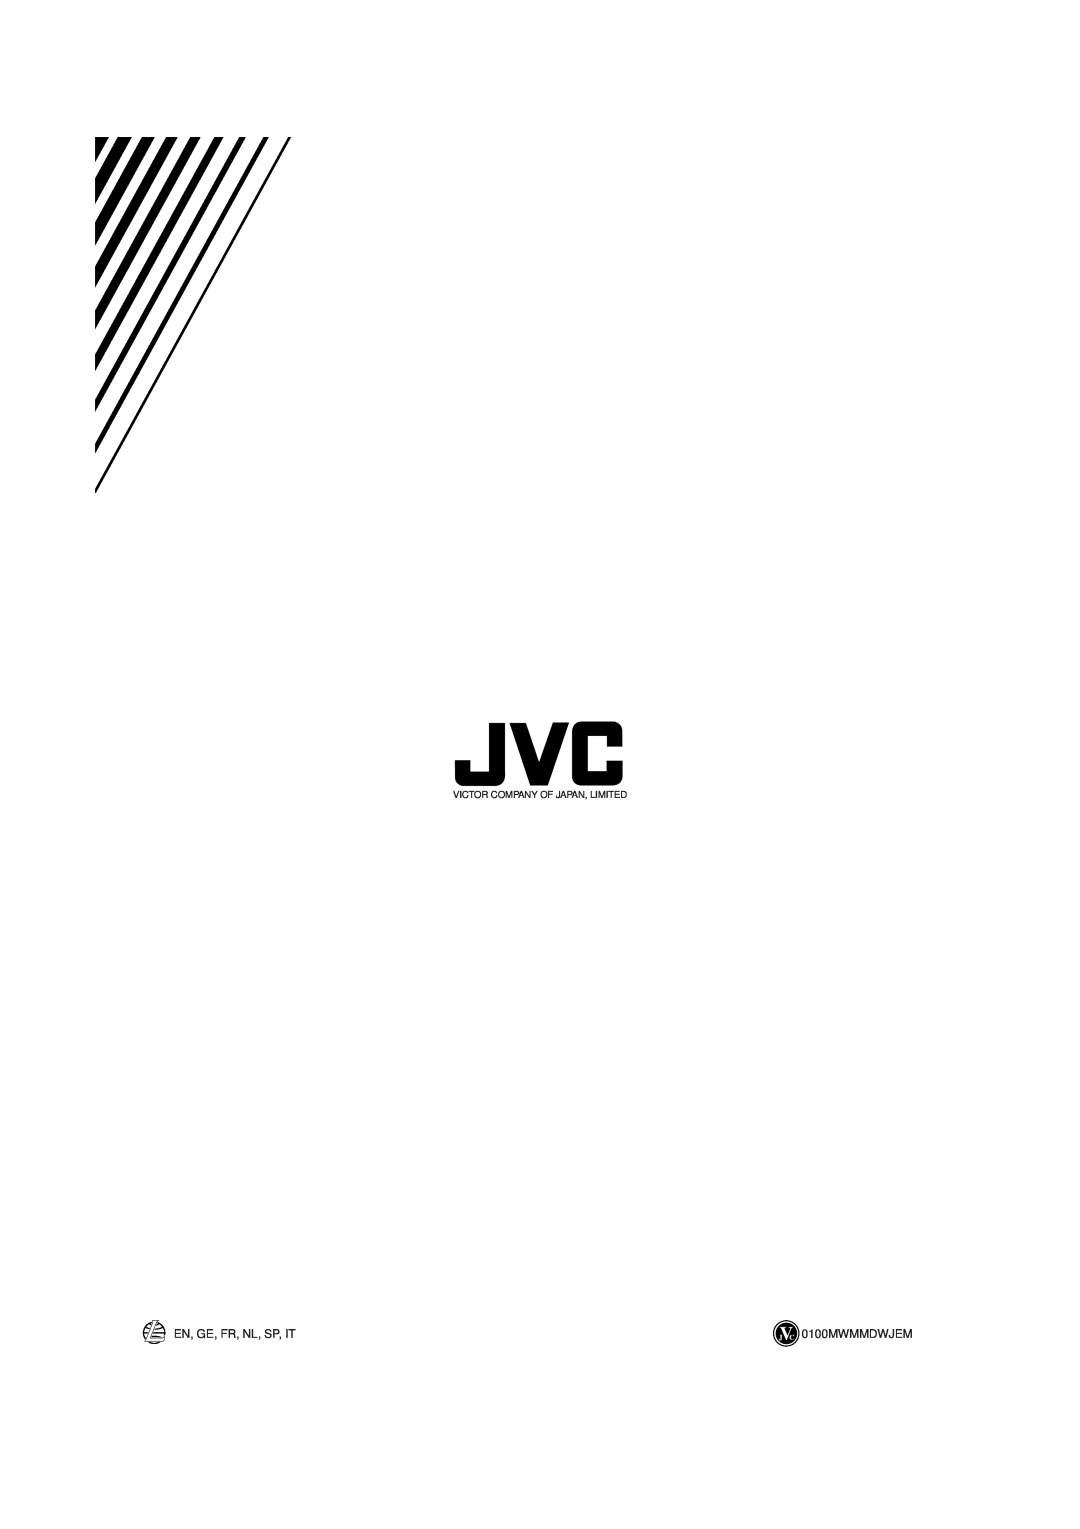 JVC UX-V20R/UX-V10 manual En, Ge, Fr, Nl, Sp, It, 0100MWMMDWJEM, Victor Company Of Japan, Limited 